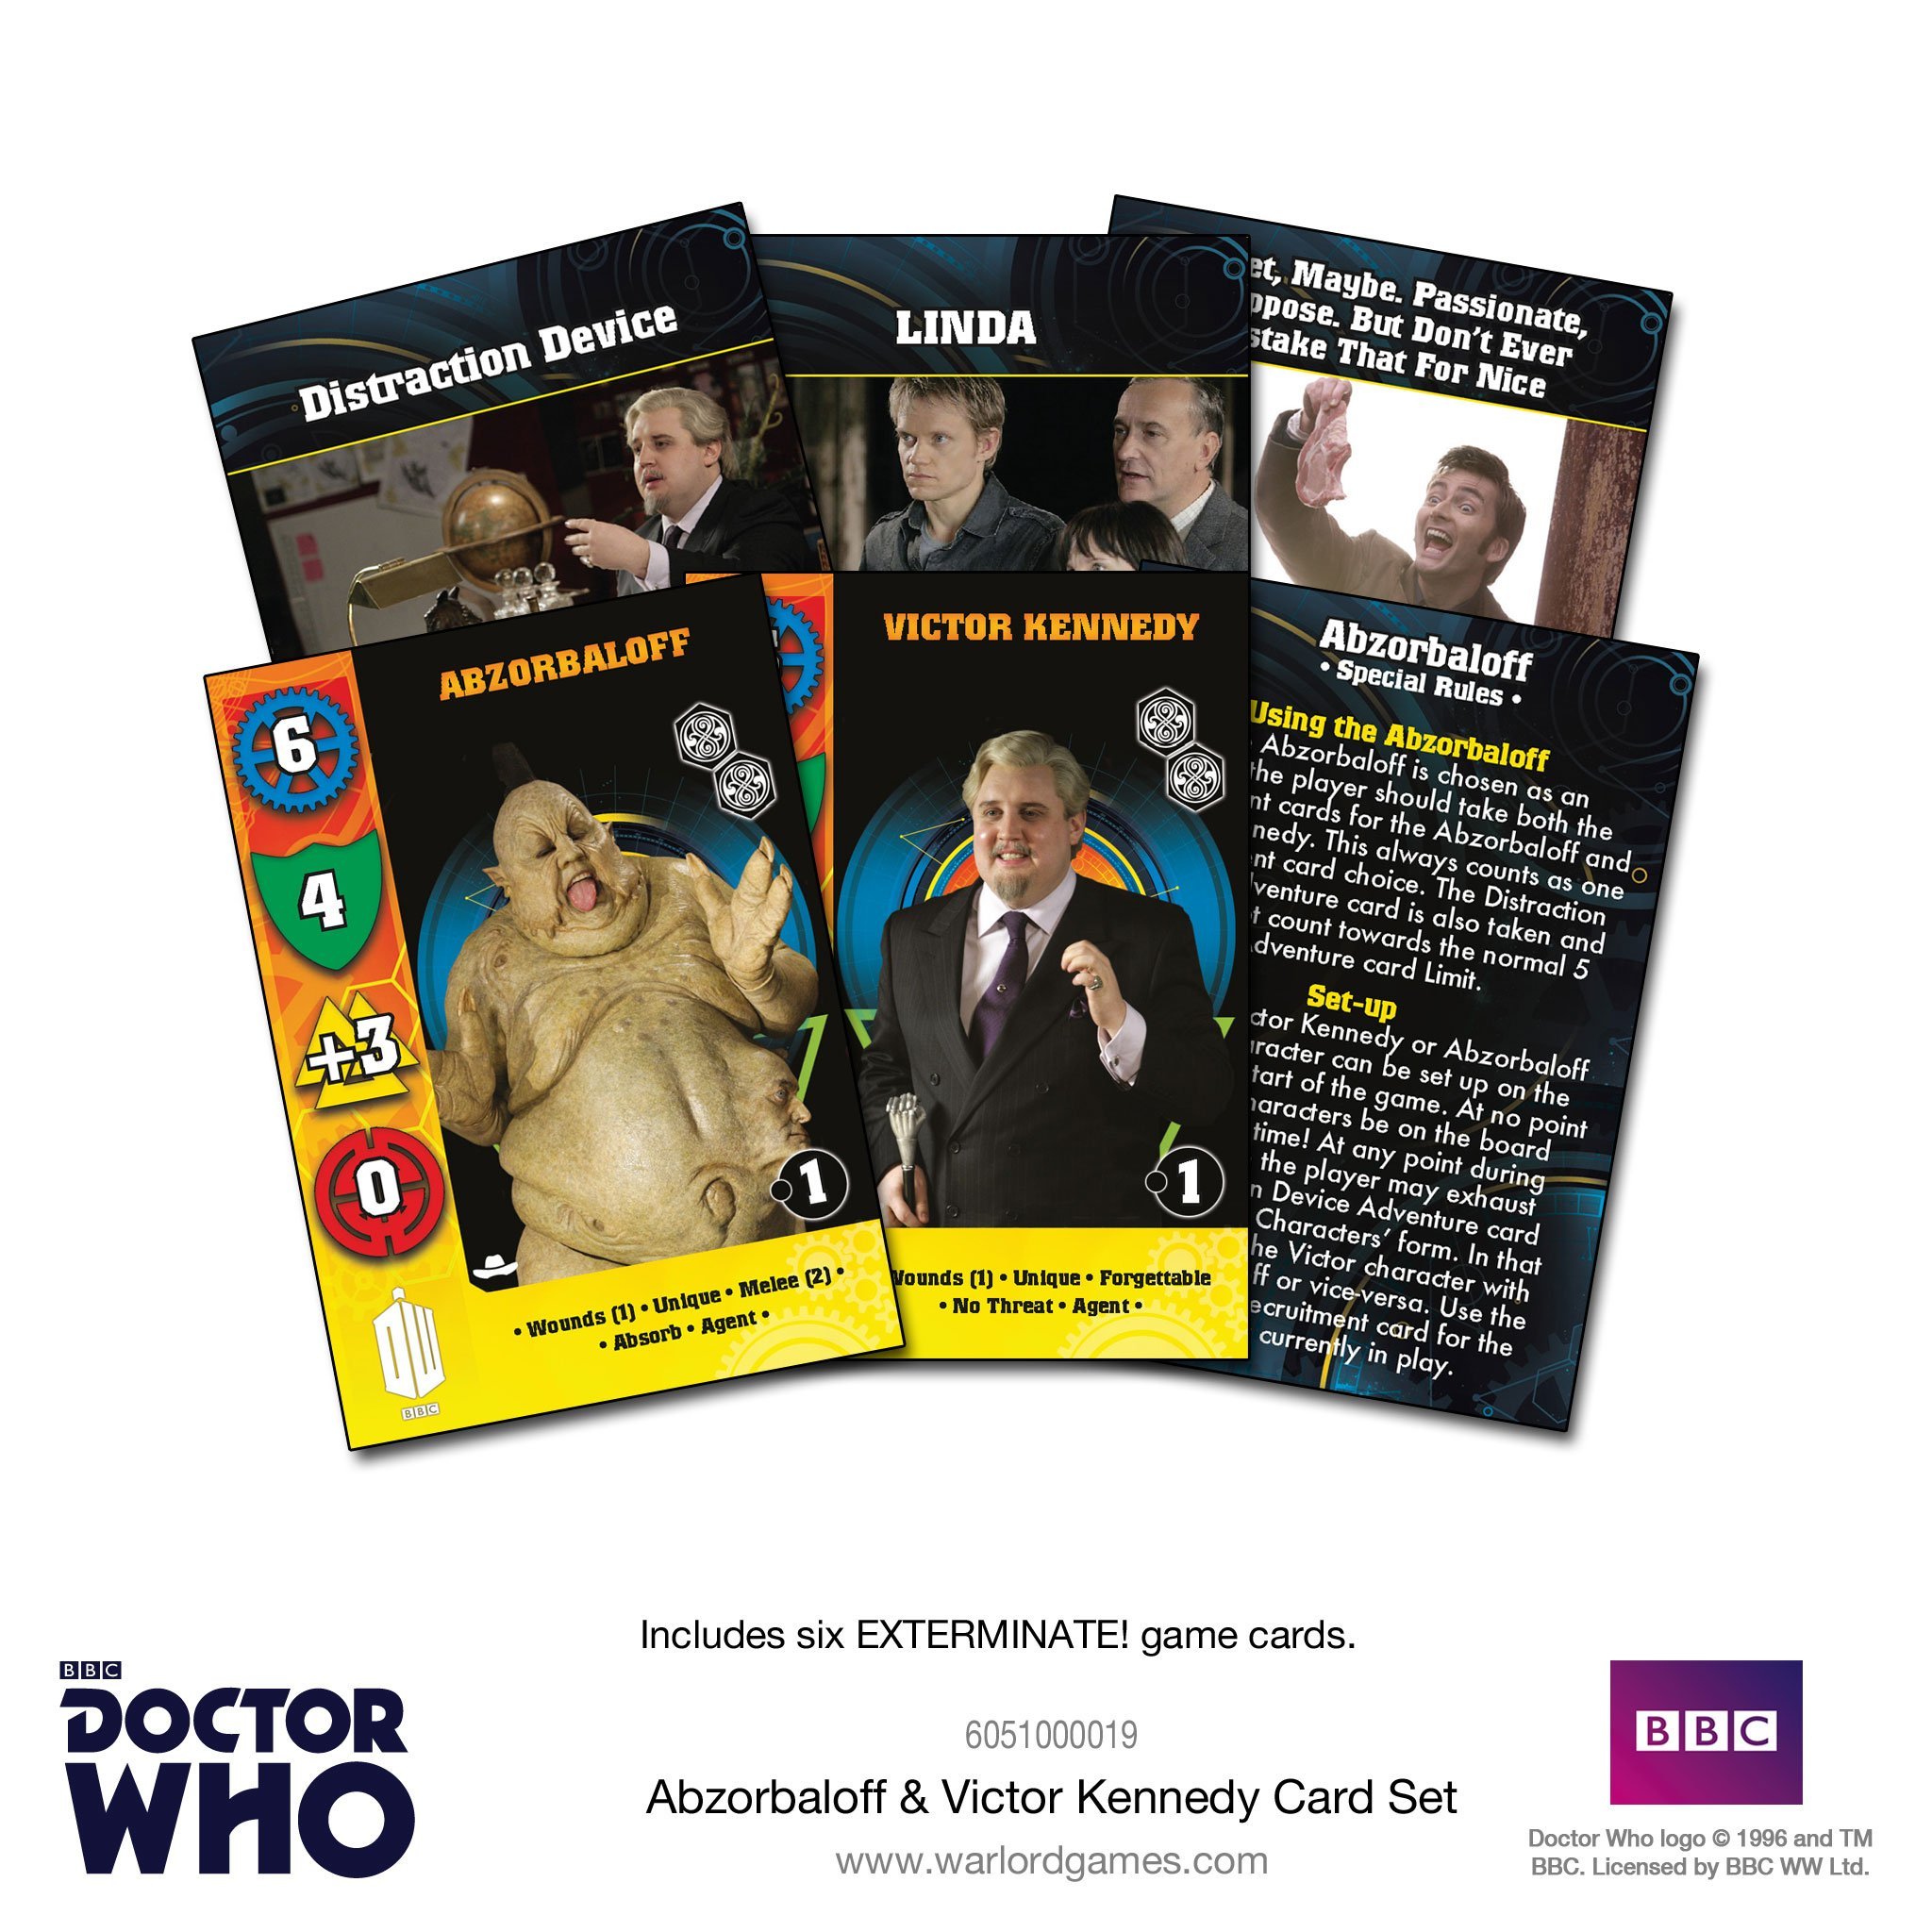 Doctor Who Exterminate: Abzorbaloff & Victor Kennedy Card Set 